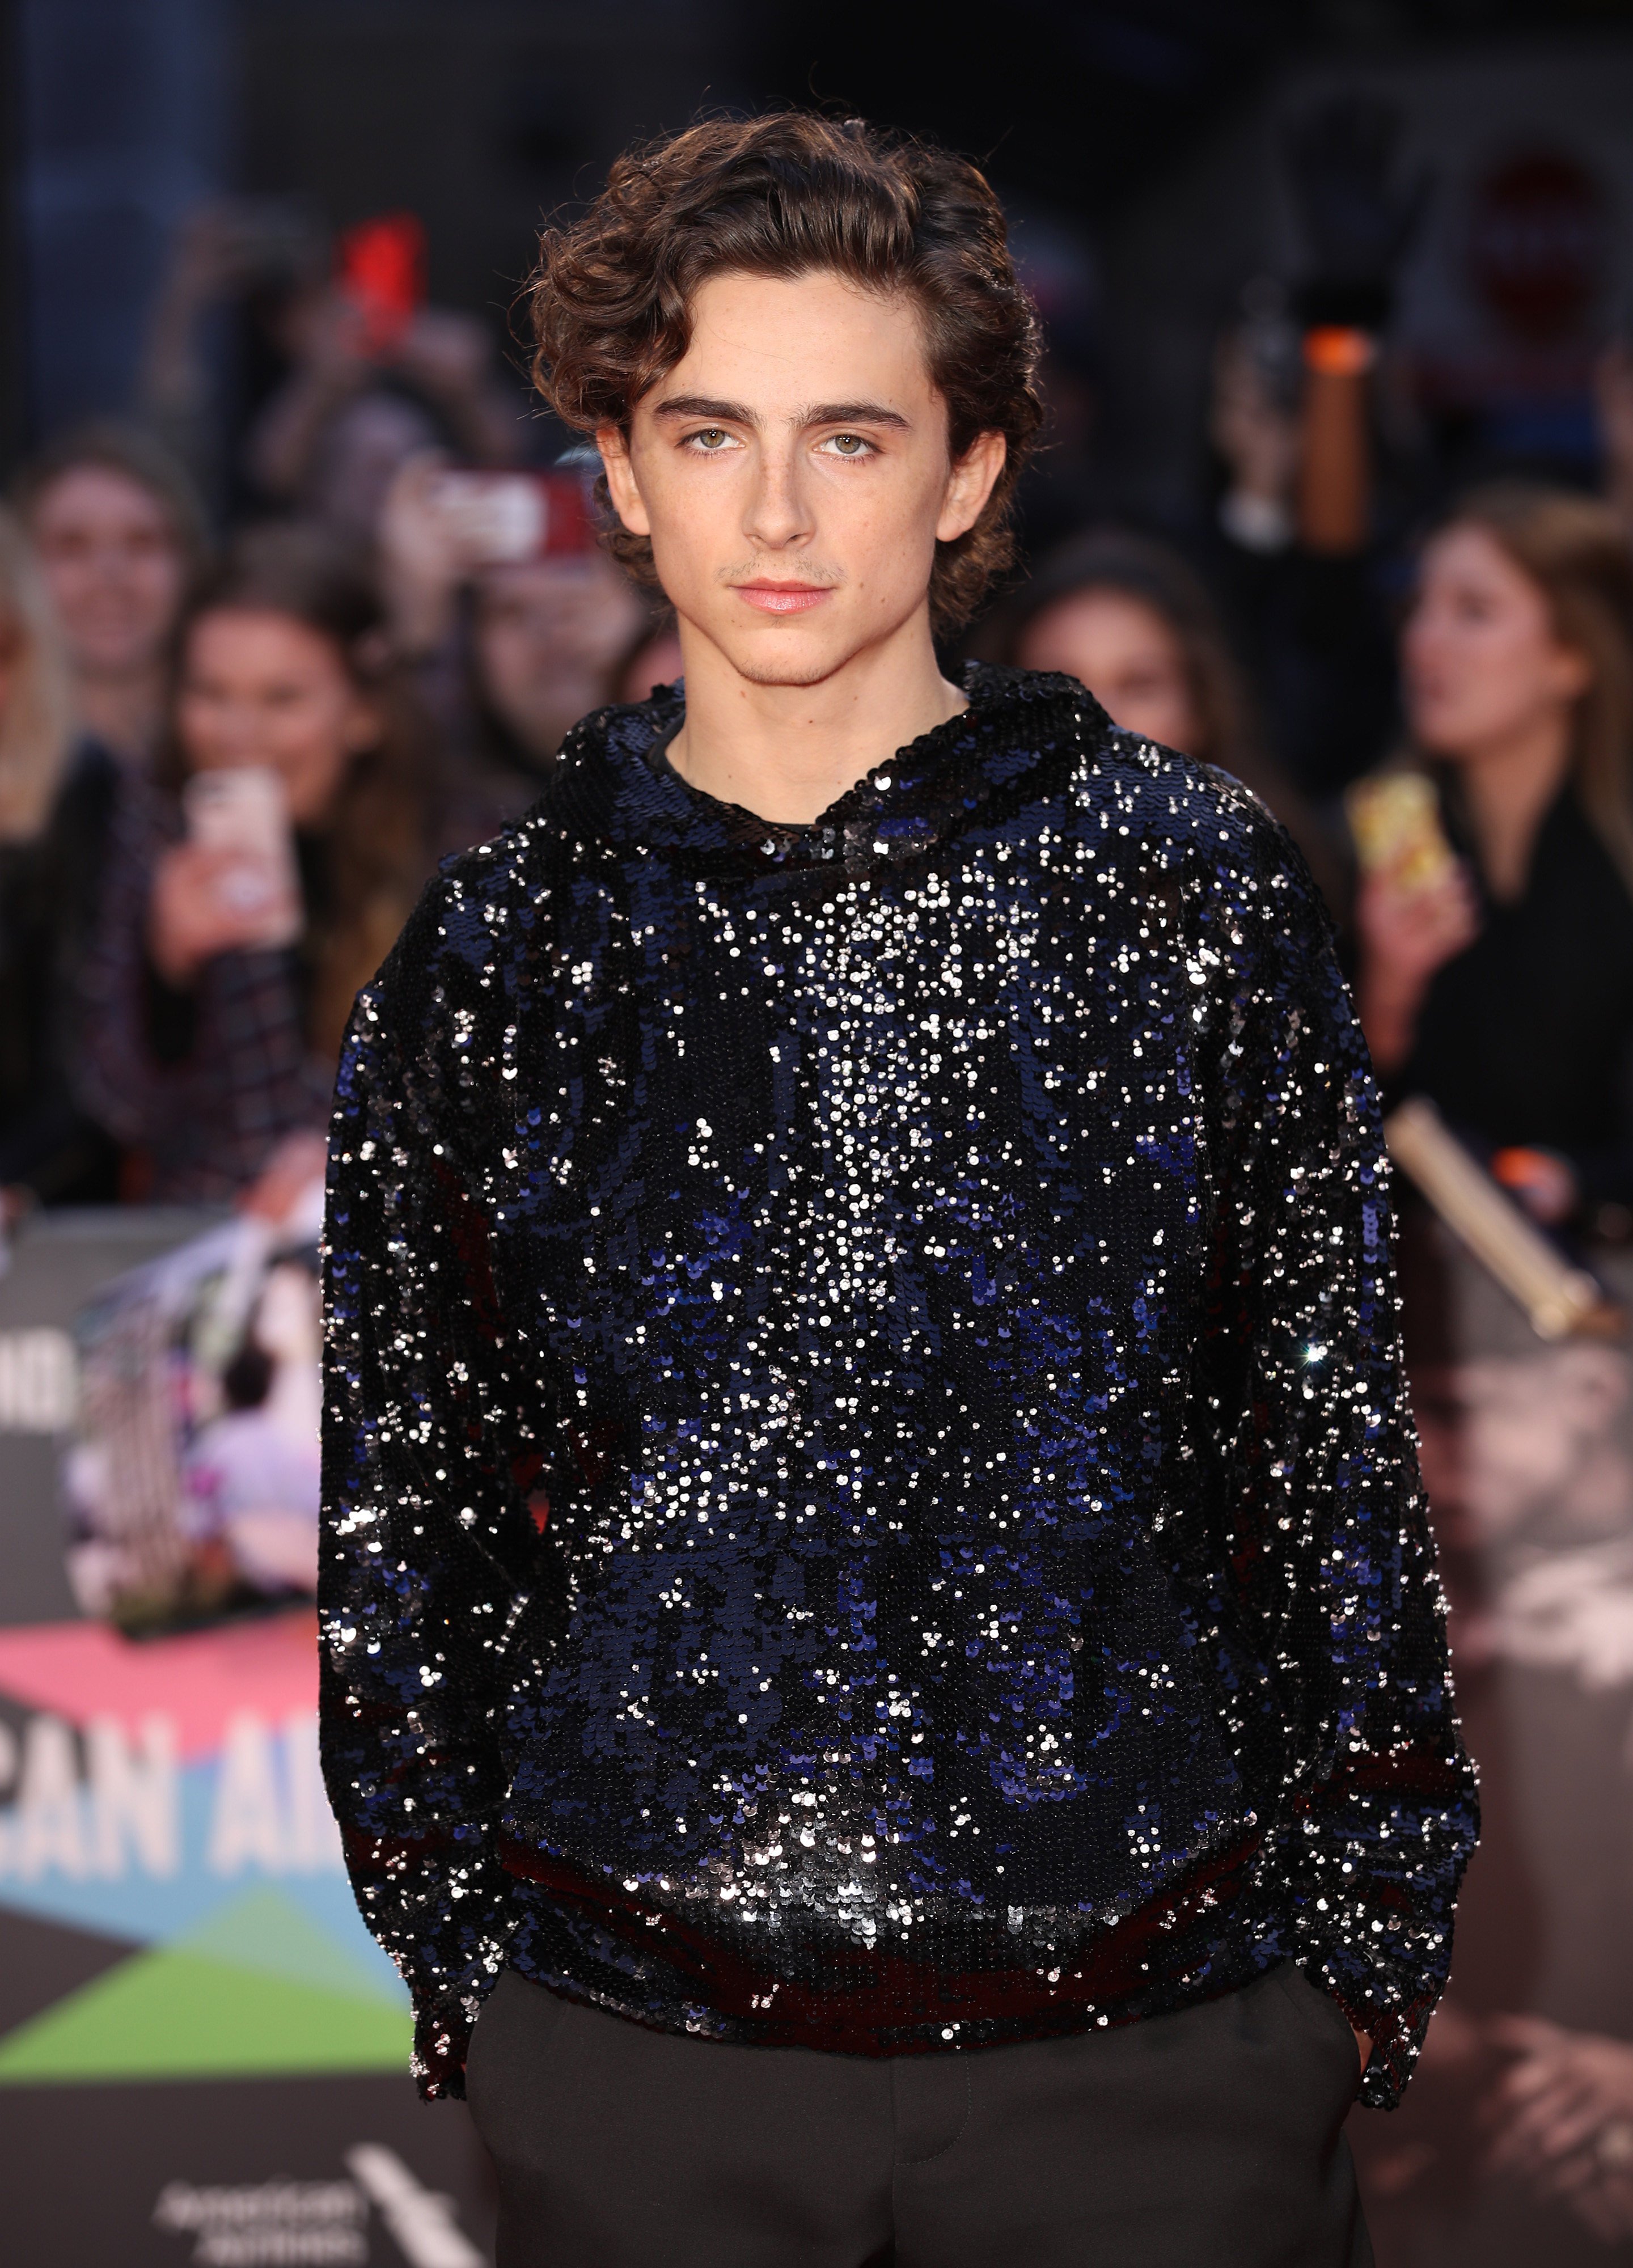 Did Timothée Chalamet’s sparkly hoodie at The King premiere in 2019 launch the streetwear staple on a path to high fashion ubiquity? Photo: WireImage